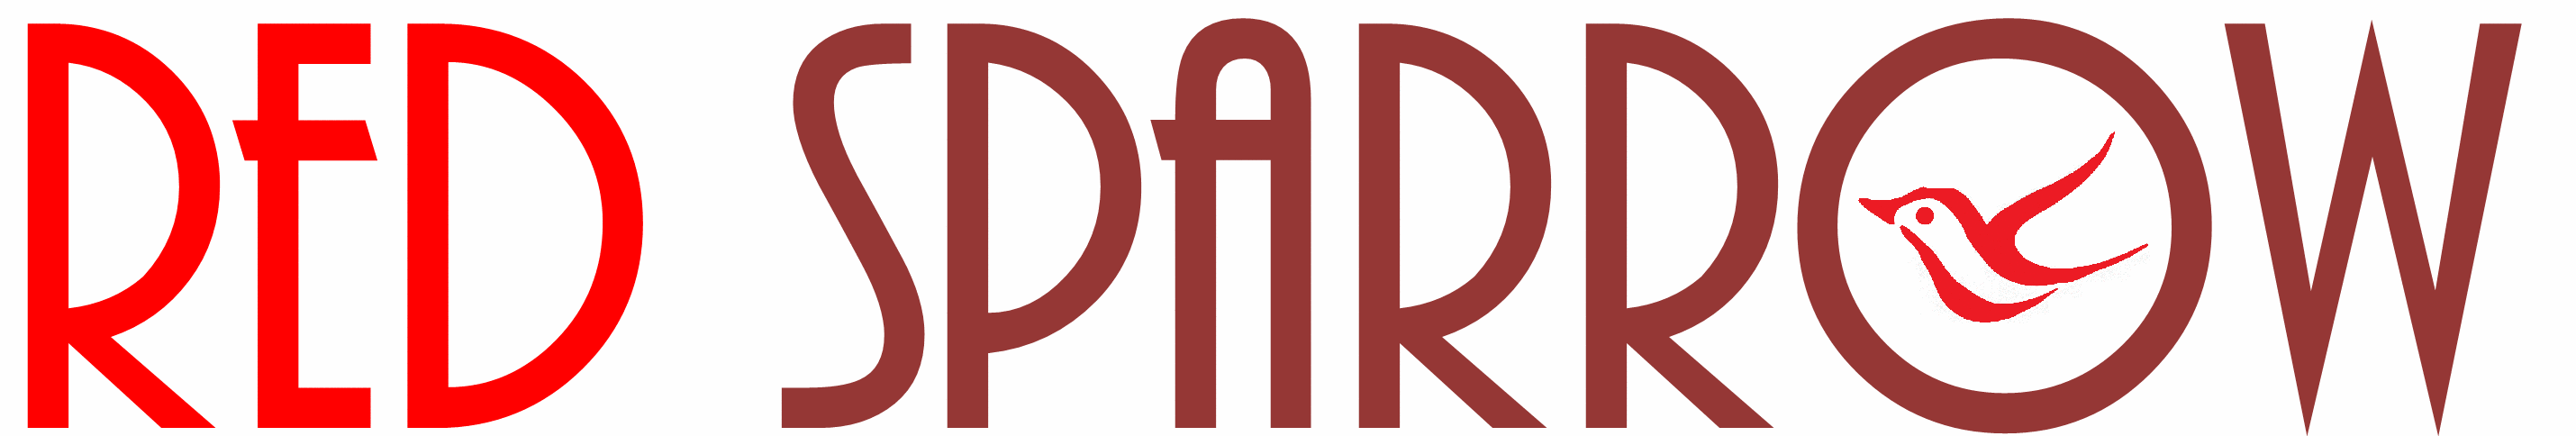 r/Red Sparrow Park/listing_logo_aa003ff1ab.png